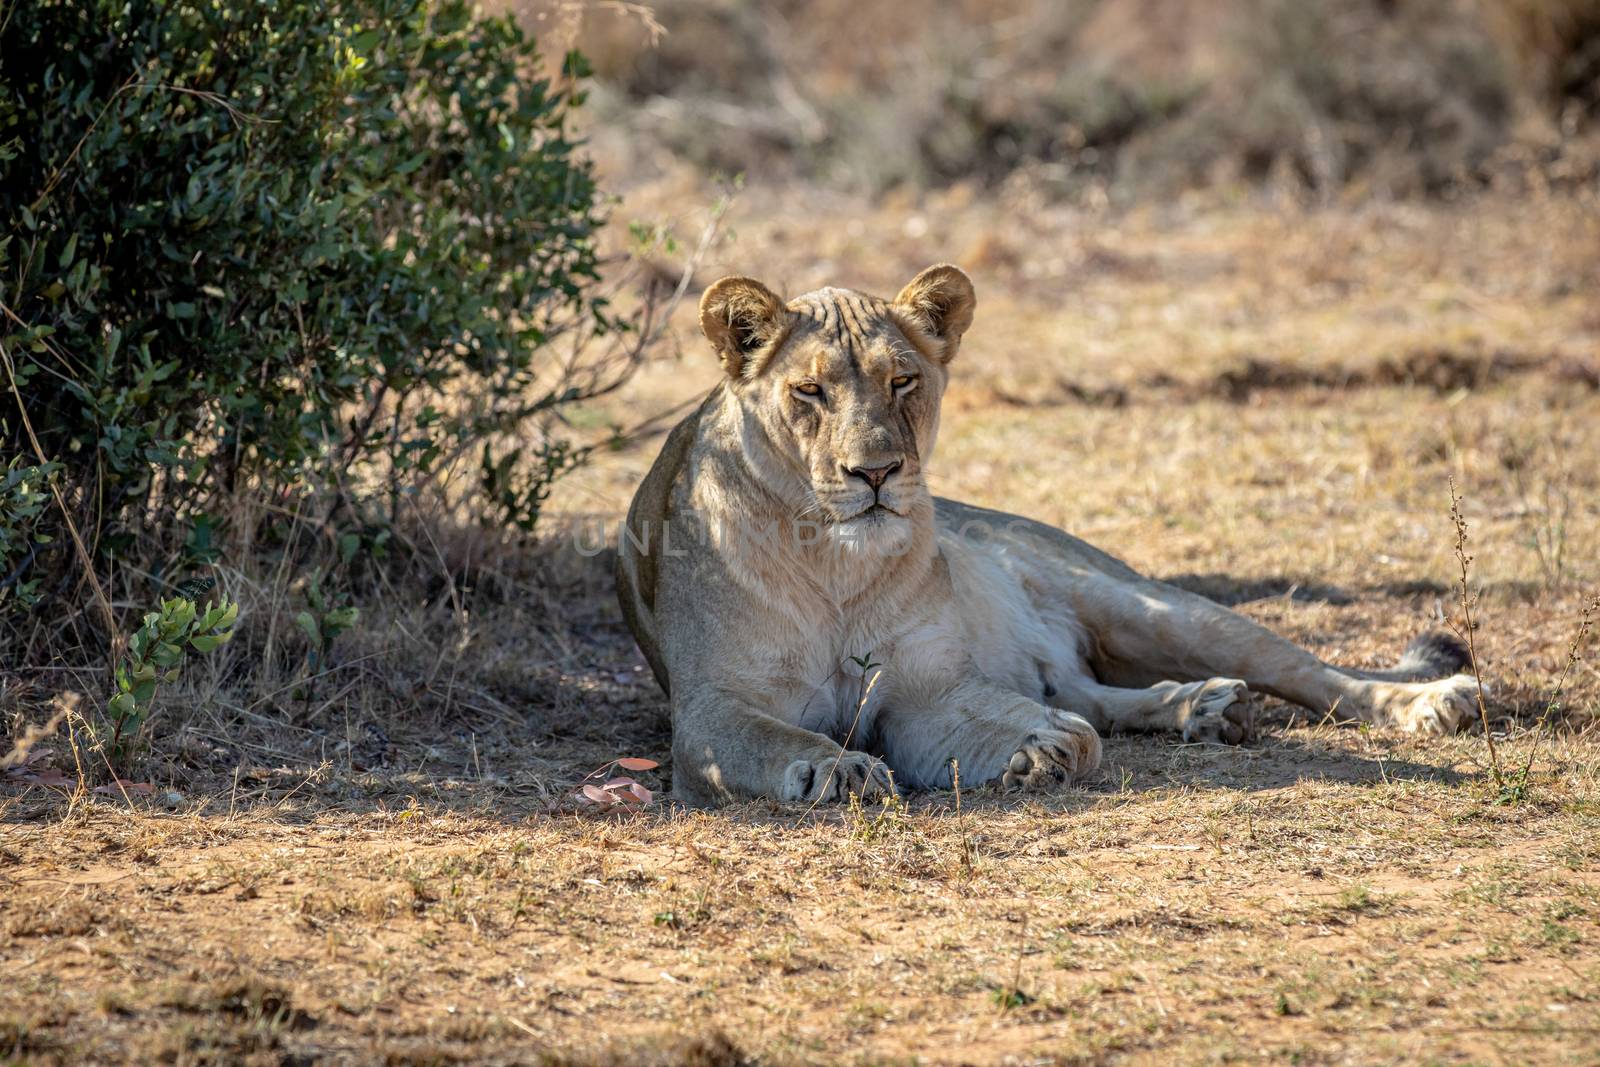 Lioness laying under a bush in the Welgevonden game reserve, South Africa.